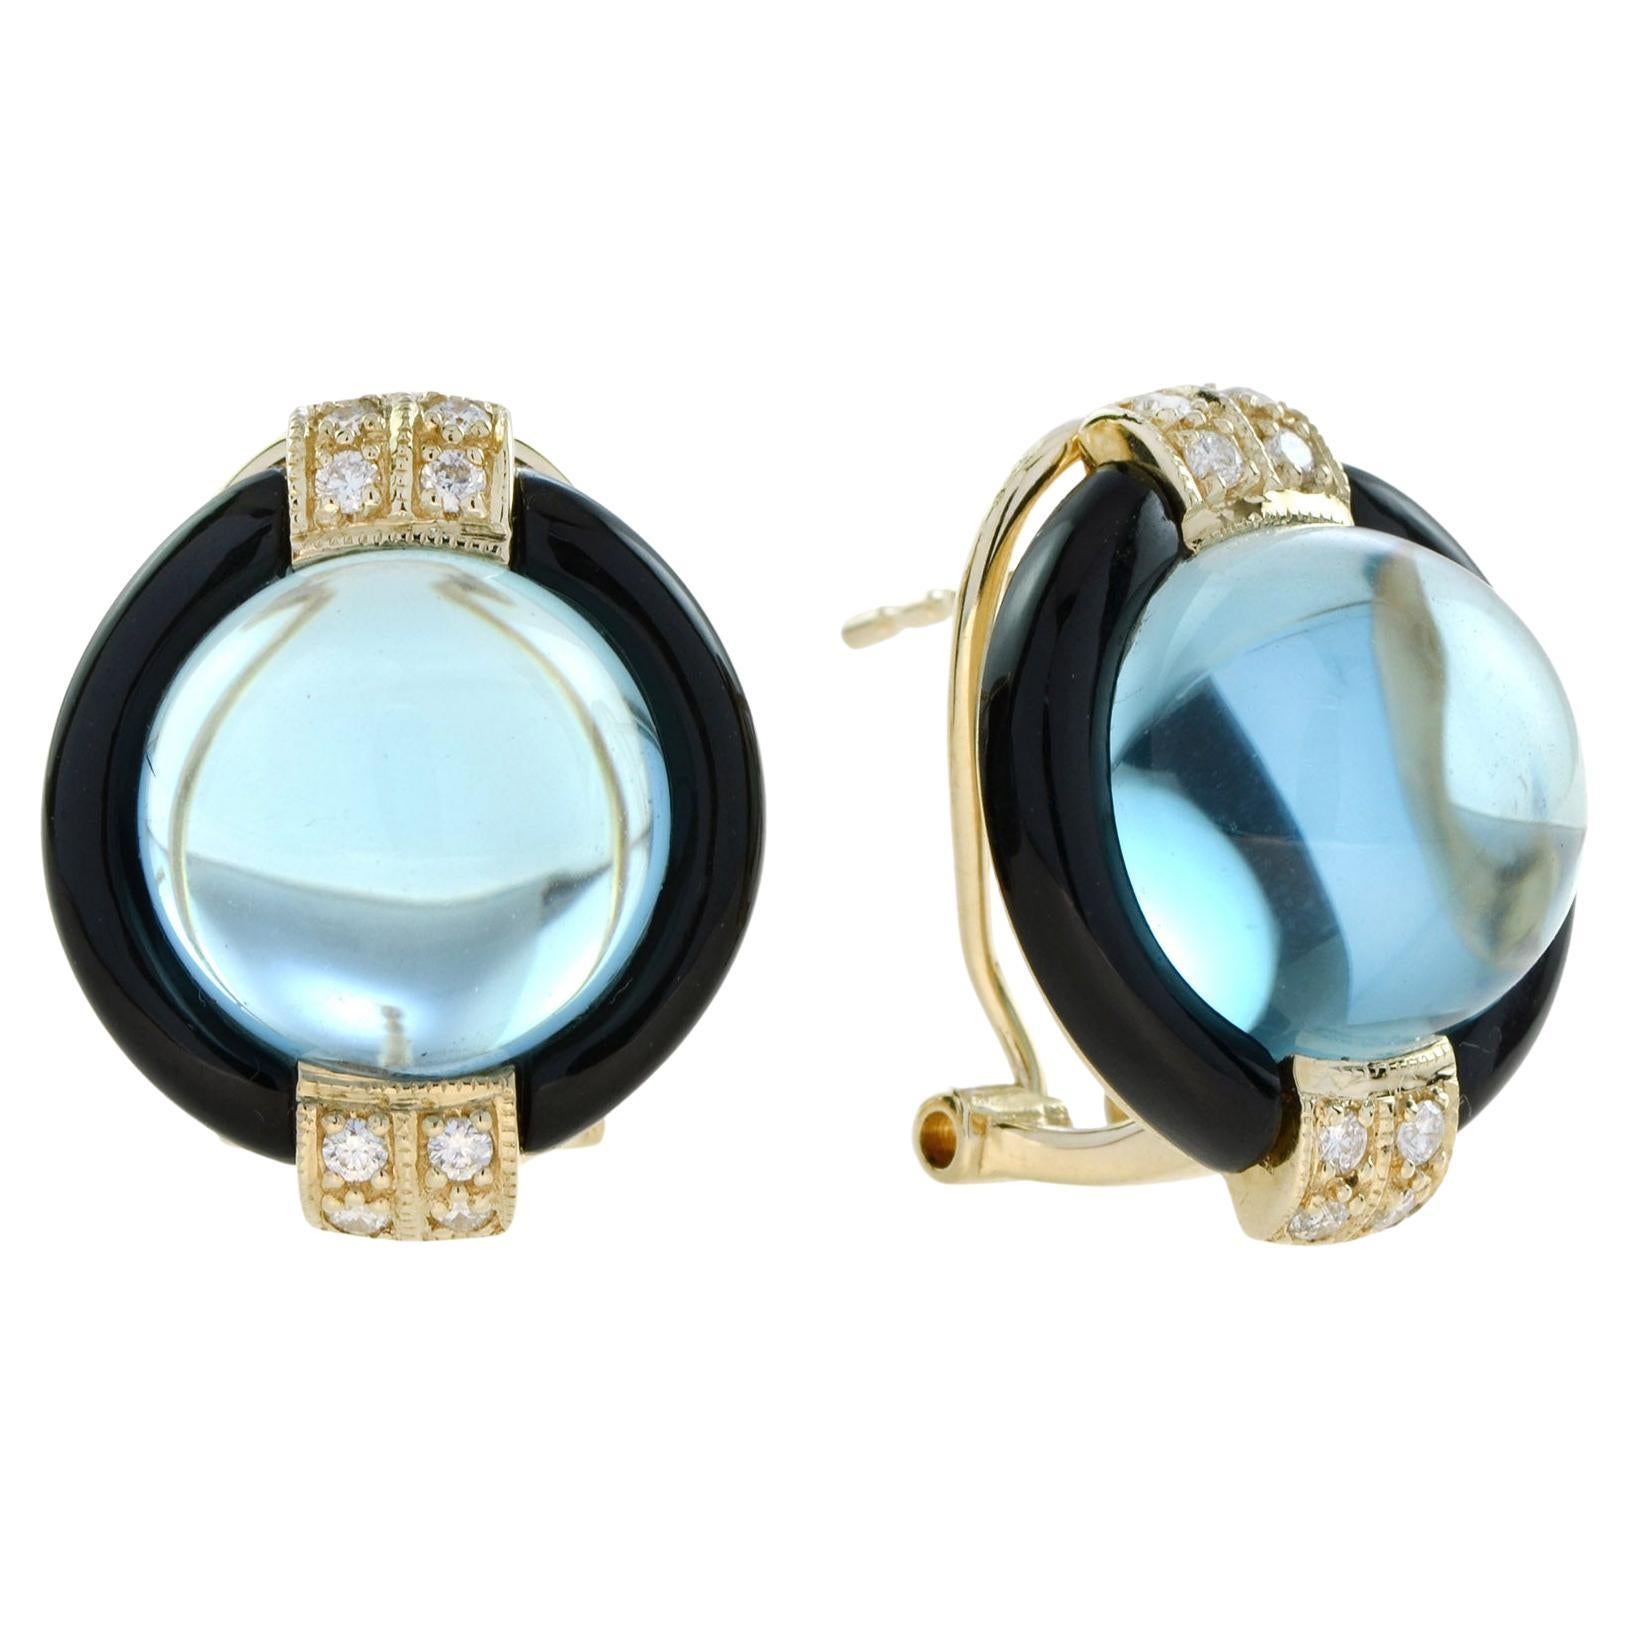 Cassiopeia Art Deco Style Cabochon Blue Topaz and Onyx Earring in 14K Gold